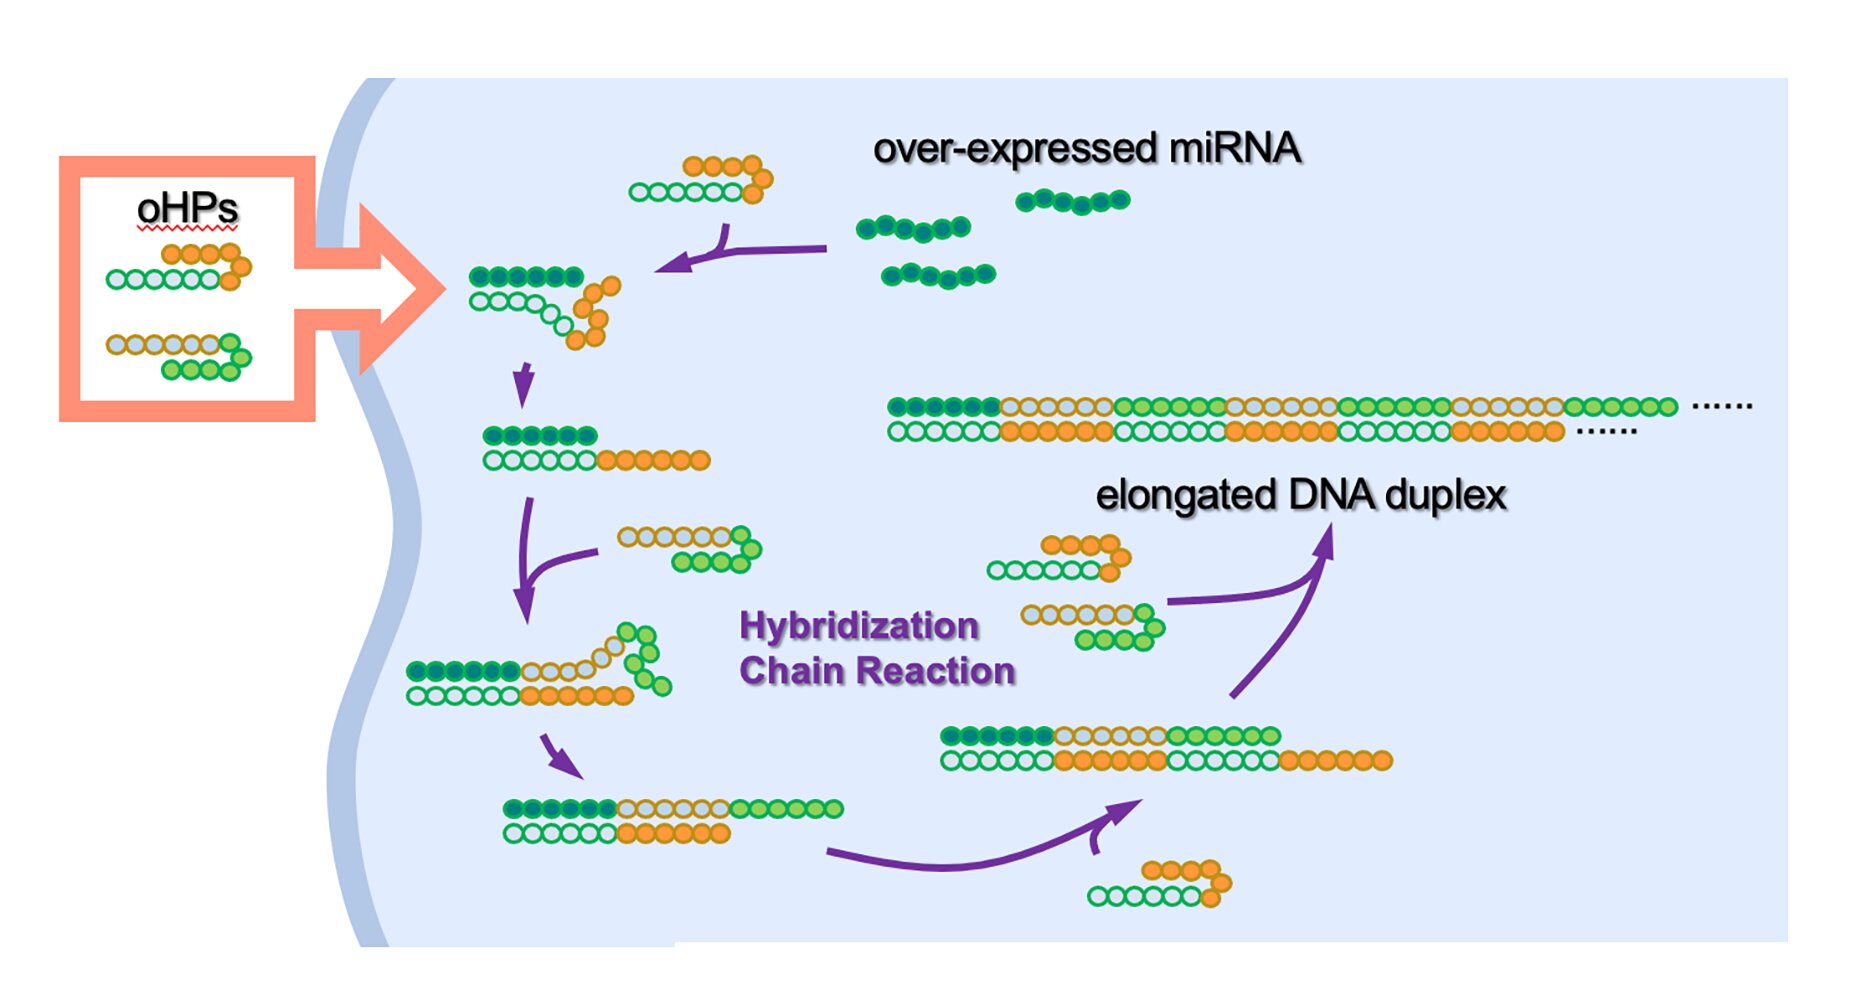 Oncolytic DNA hairpin pairs (oHPs) are introduced to the cancer cell. When the oHPs encounter the tumor-causing overexpressed microRNA (miRNA), they unravel to connect with the miRNA and each other to form longer DNA strands. These elongated strands then trigger an immune response, the body’s built-in defense mechanism, which inhibits further tumor growth. CREDIT 2022 Akimitsu Okamoto